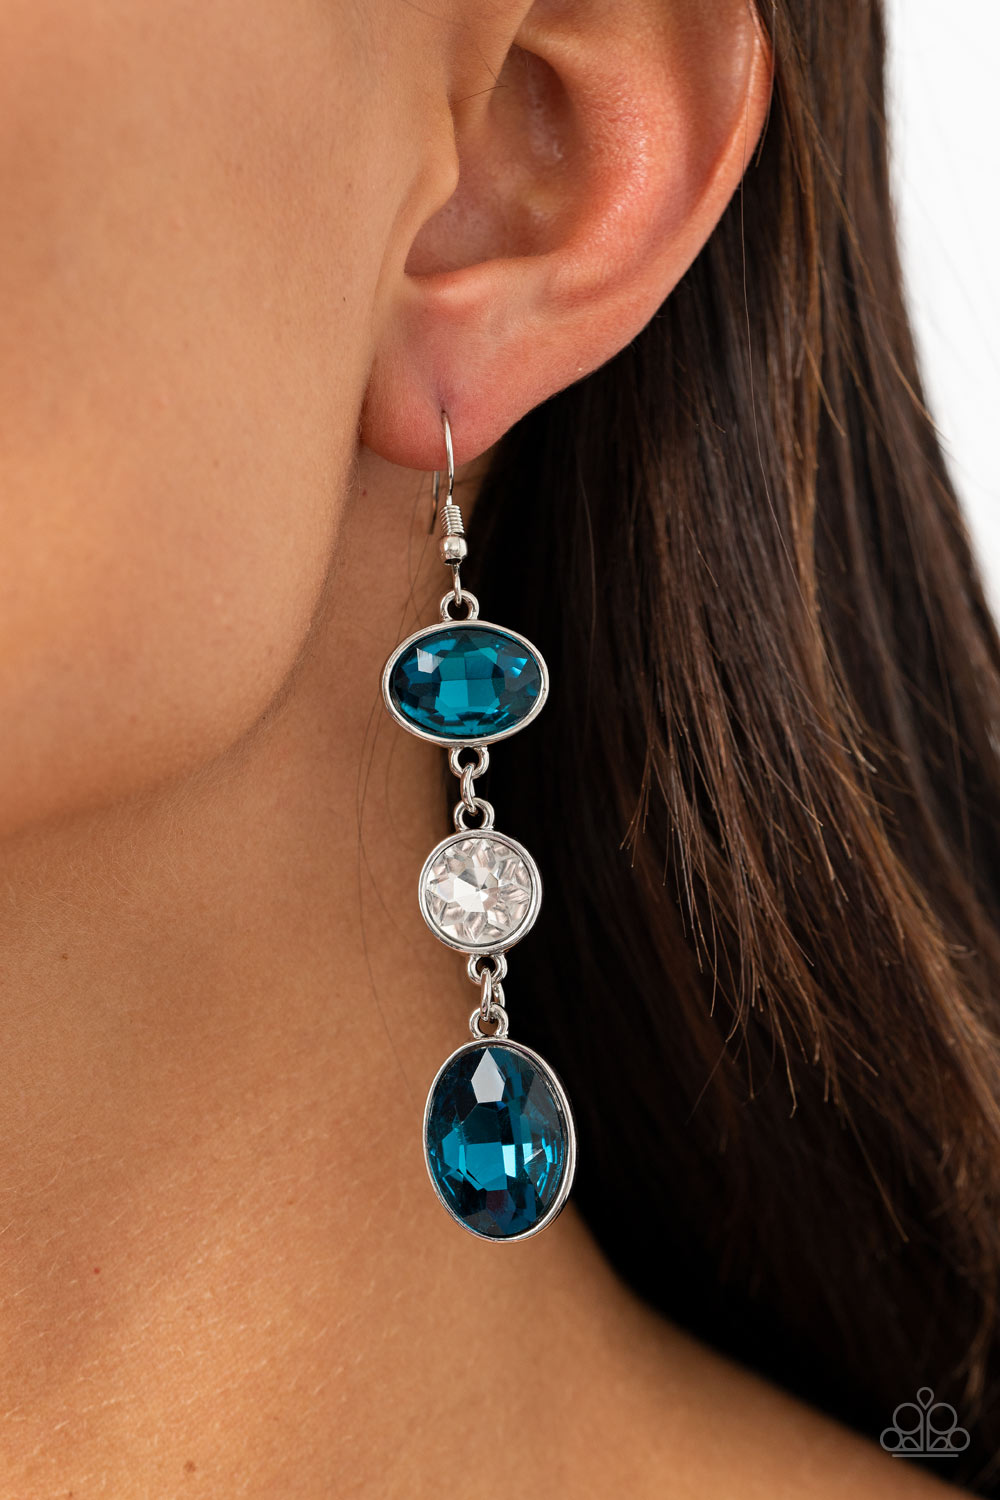 Paparazzi Earring ~ The GLOW Must Go On! - Blue